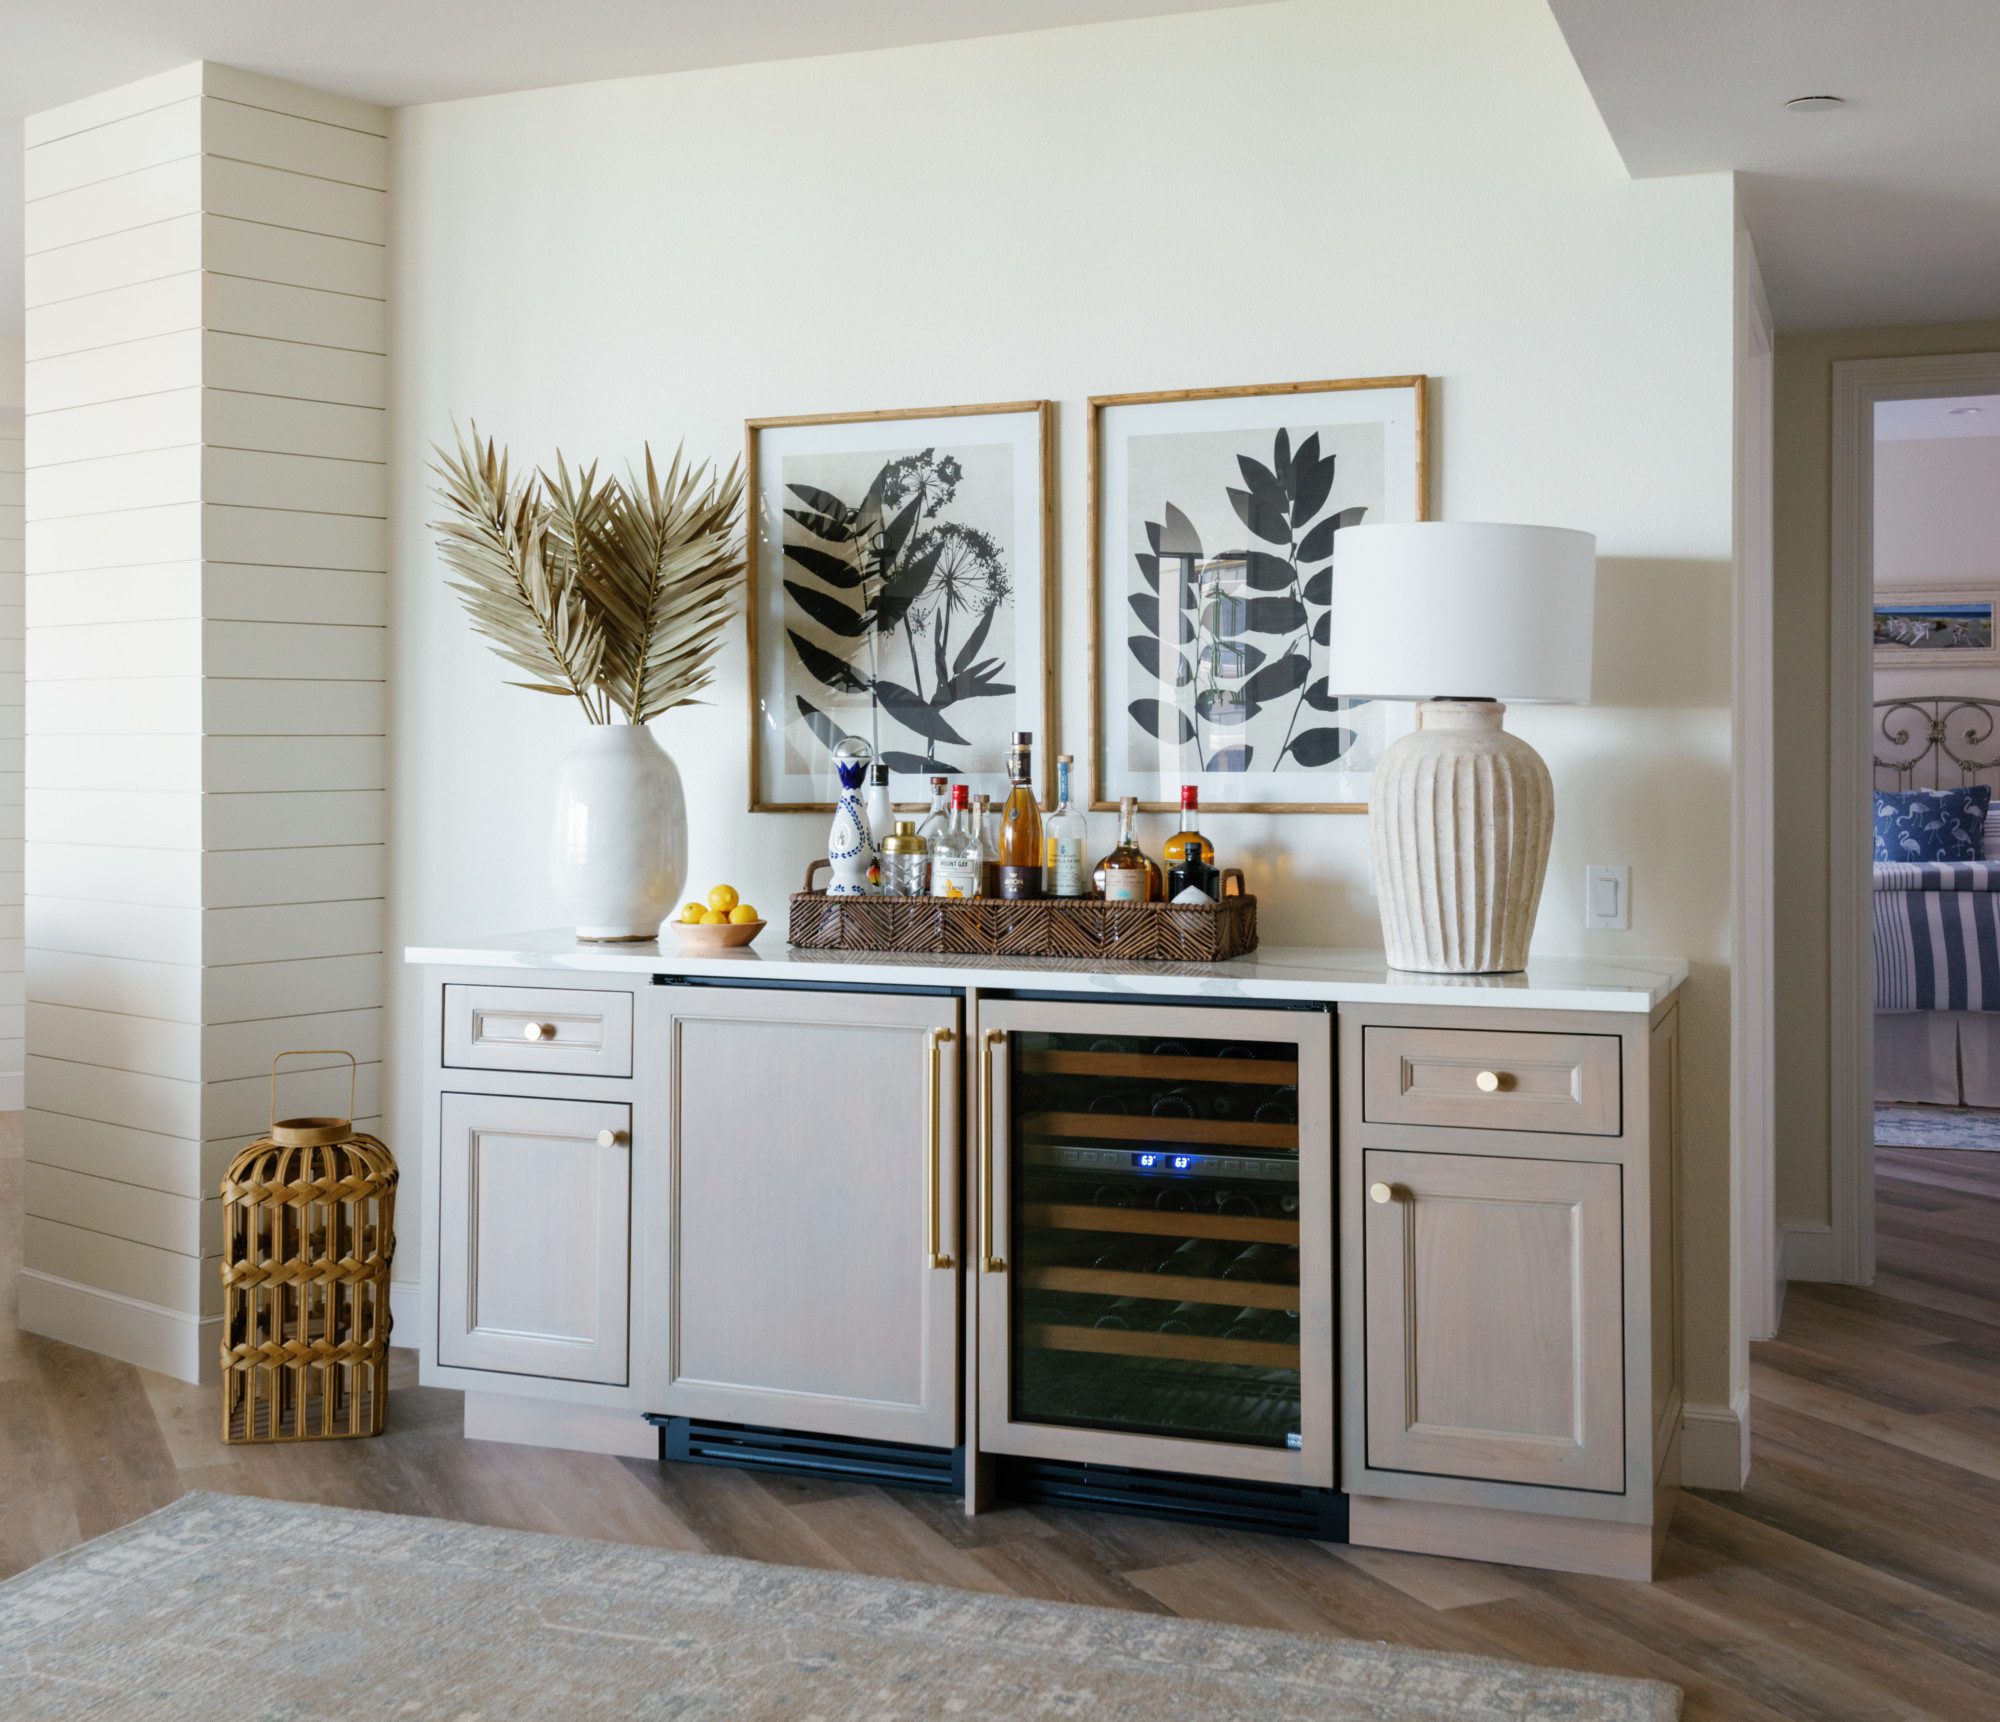 a mini bar in a bright room with natural accents